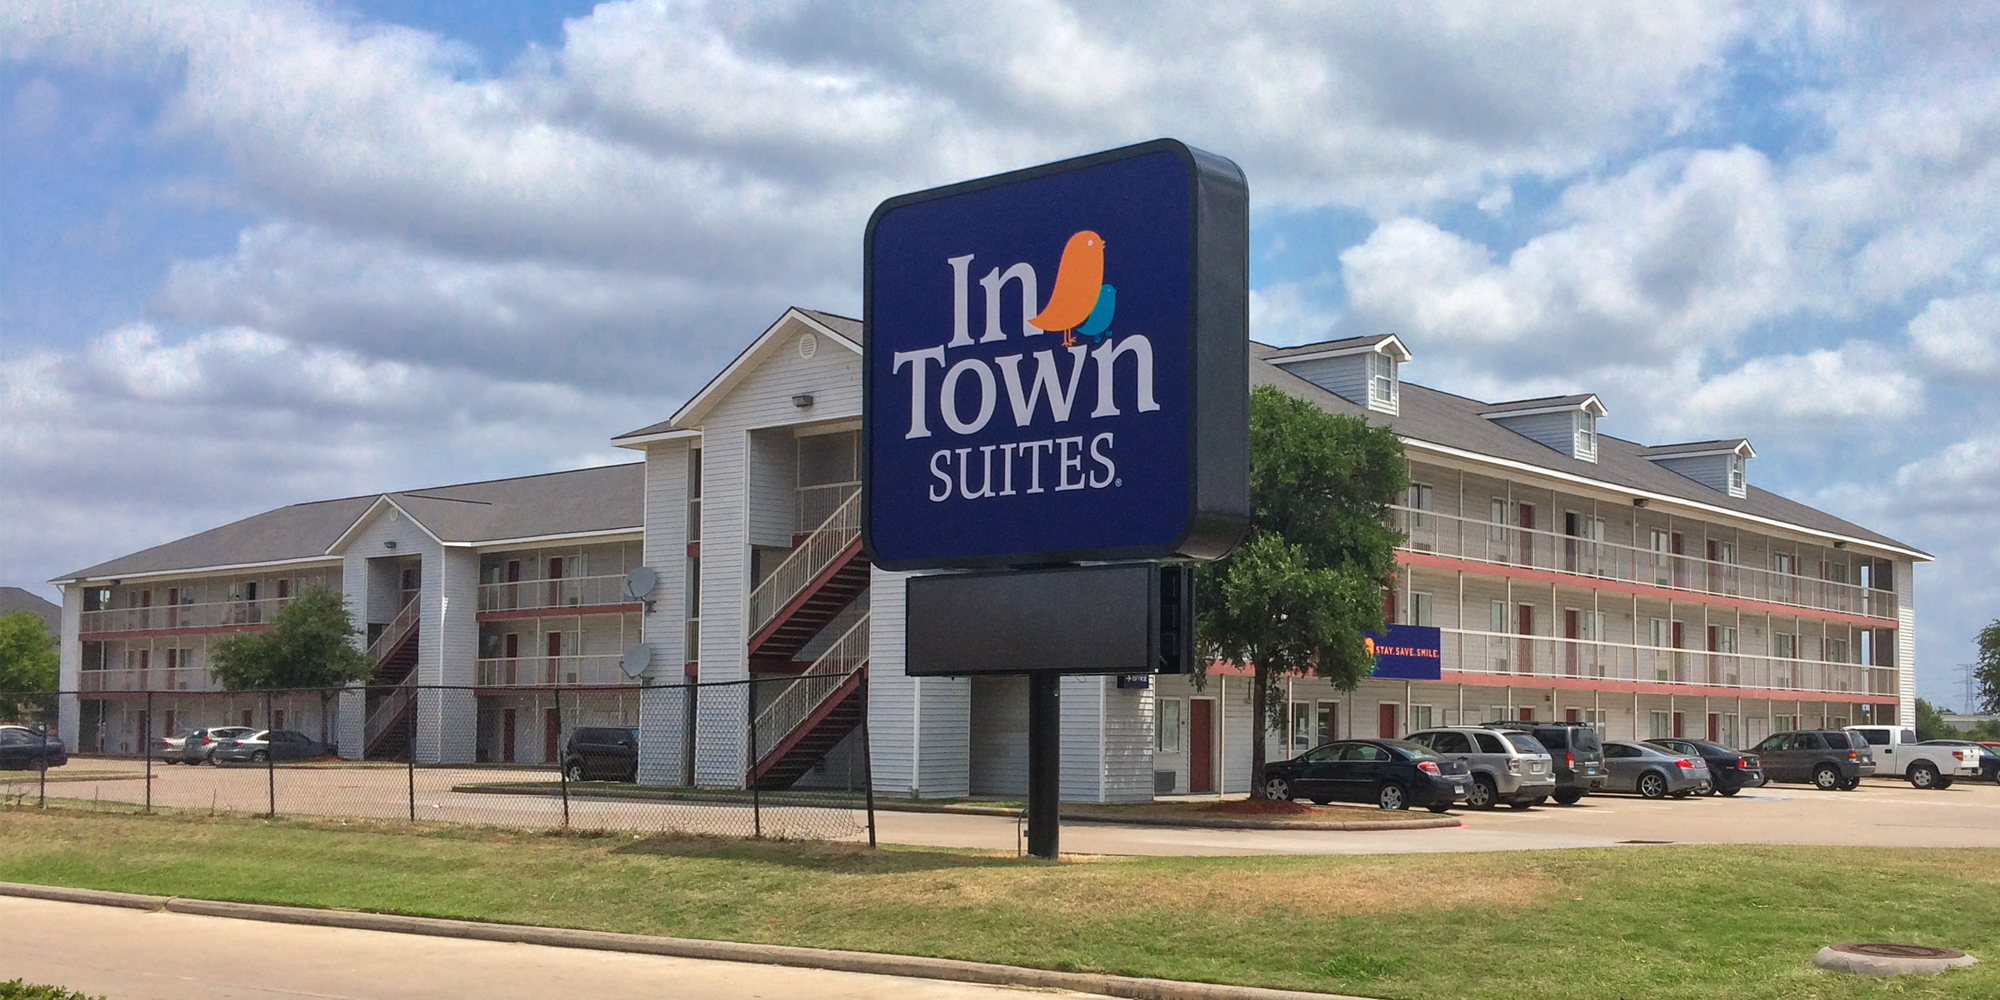 North Houston, TX Extended Stay Hotel InTown Suites